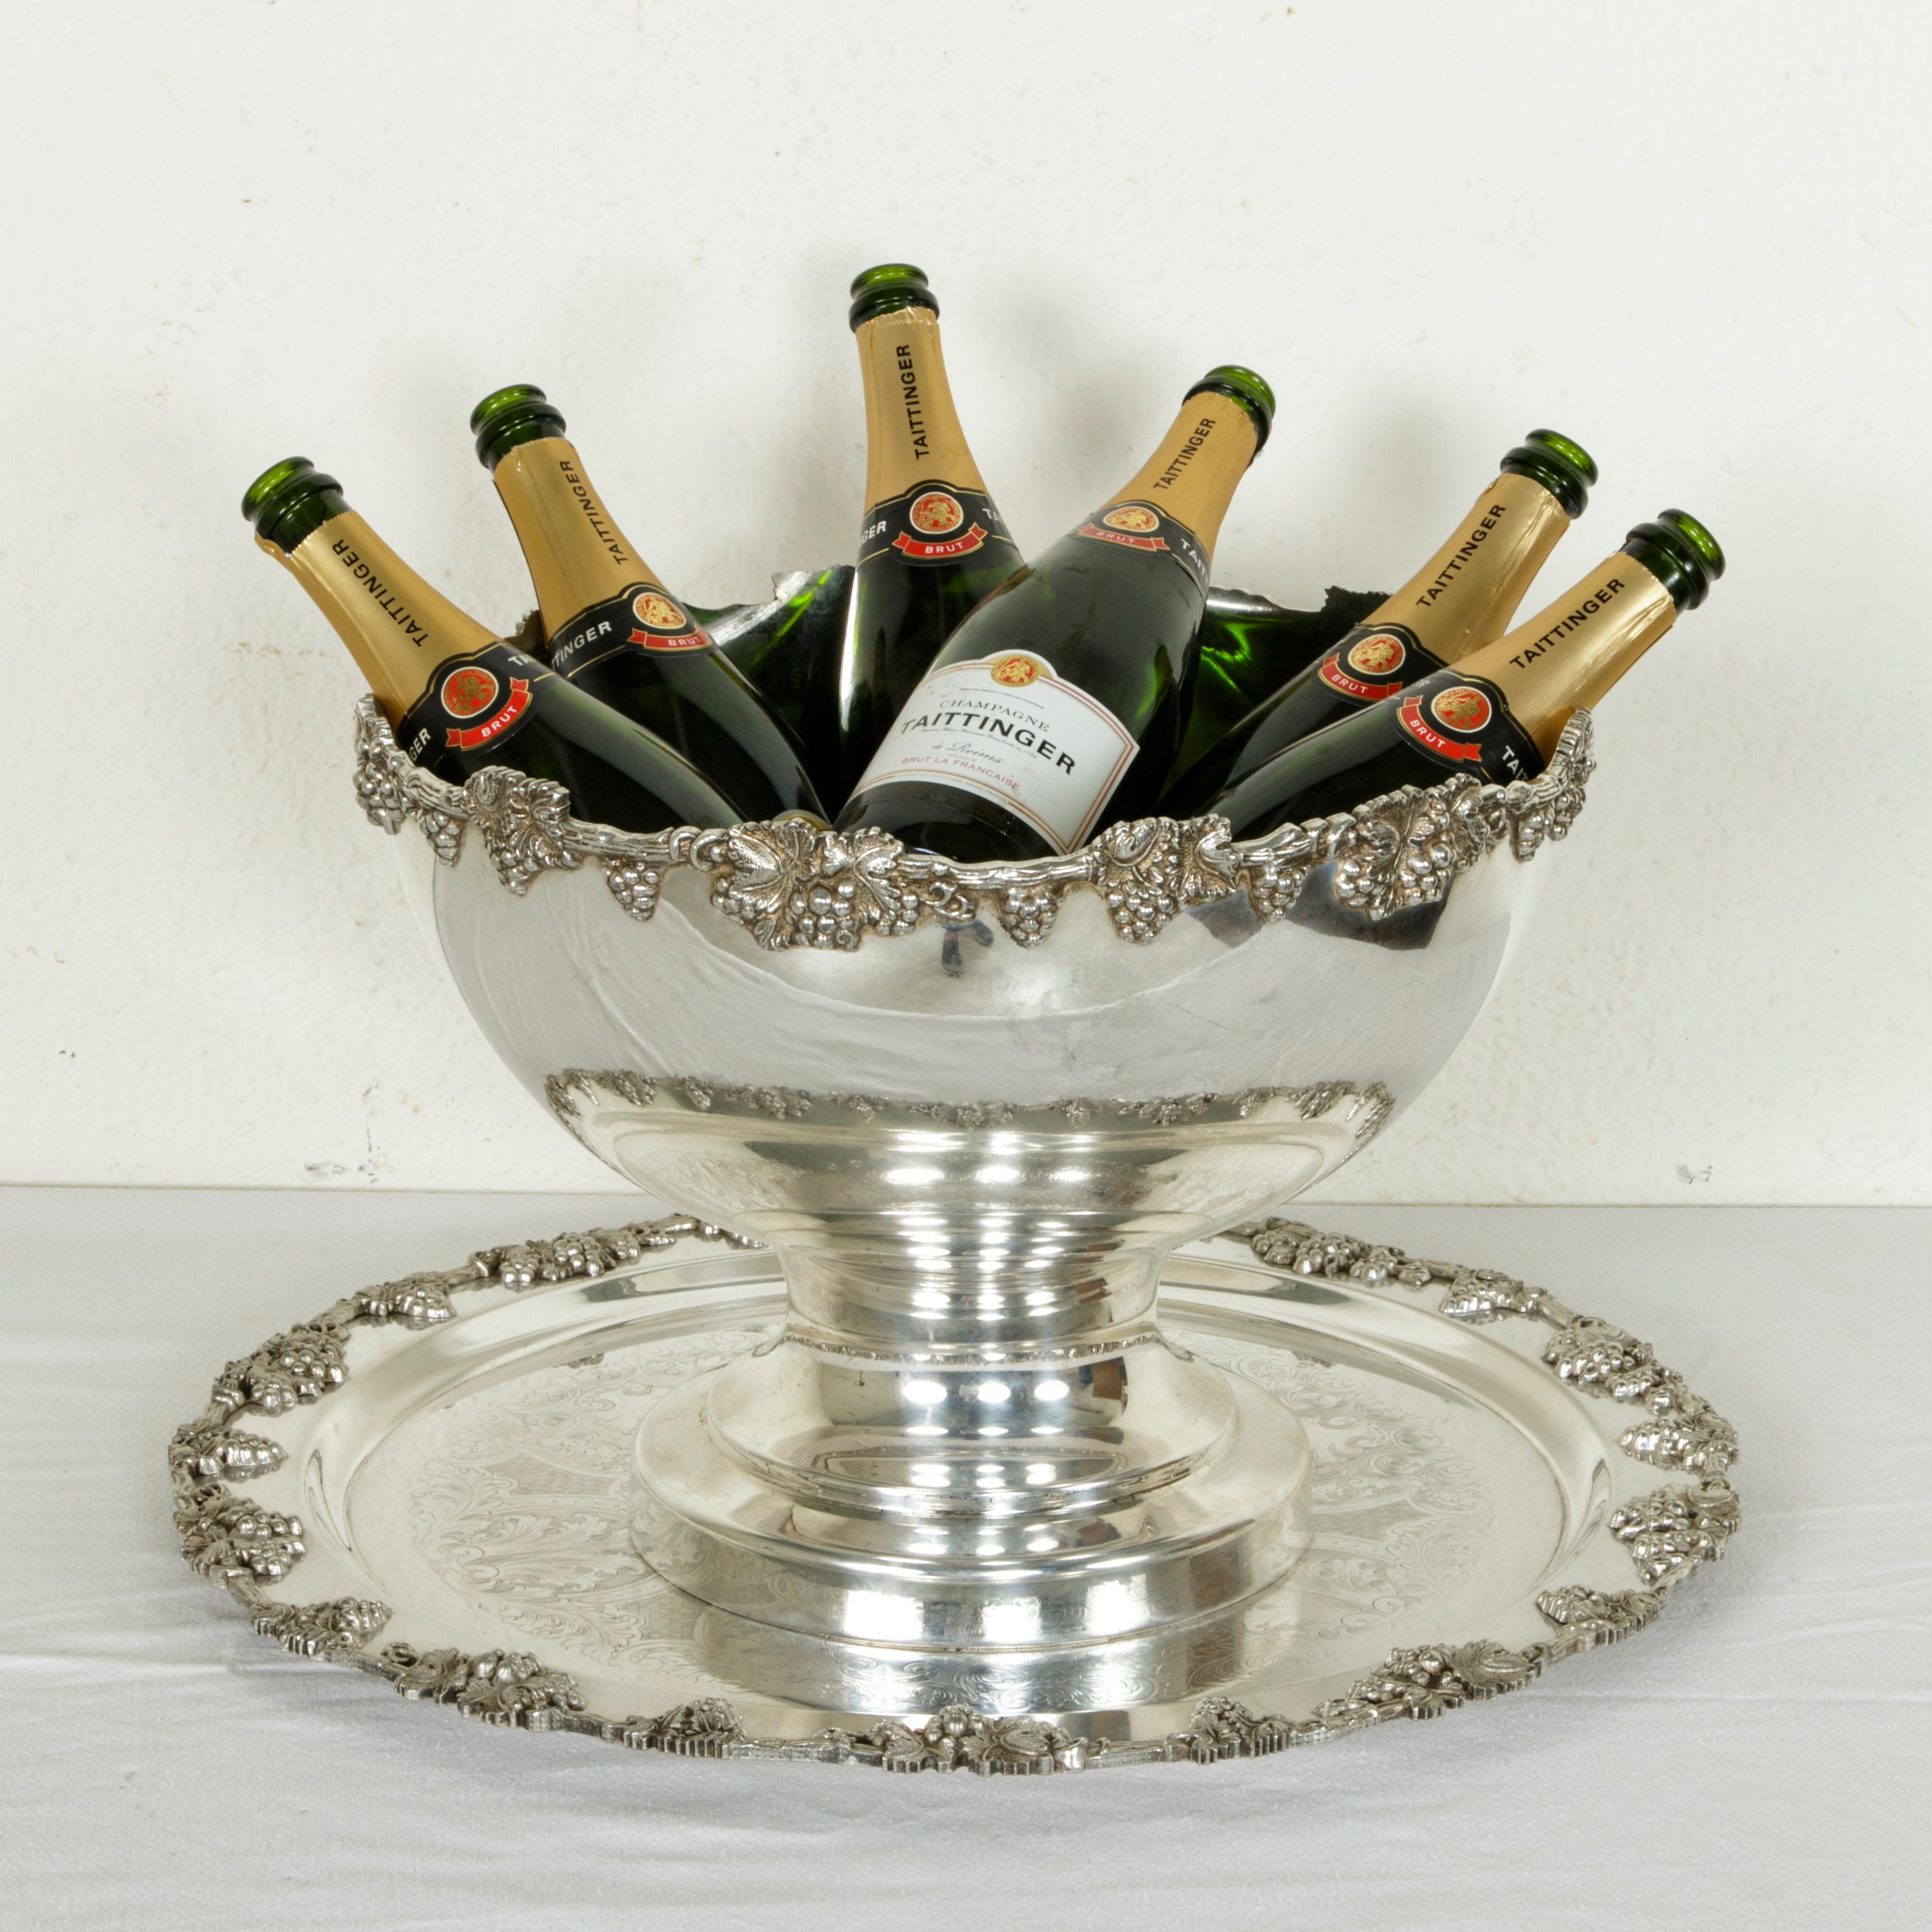 This large early 20th century English silver plate footed hotel champagne bucket holds up to six bottles and is accompanied by a matching tray. The bucket and tray feature borders of grapes and grape vines. The tray measures 21 inches in diameter